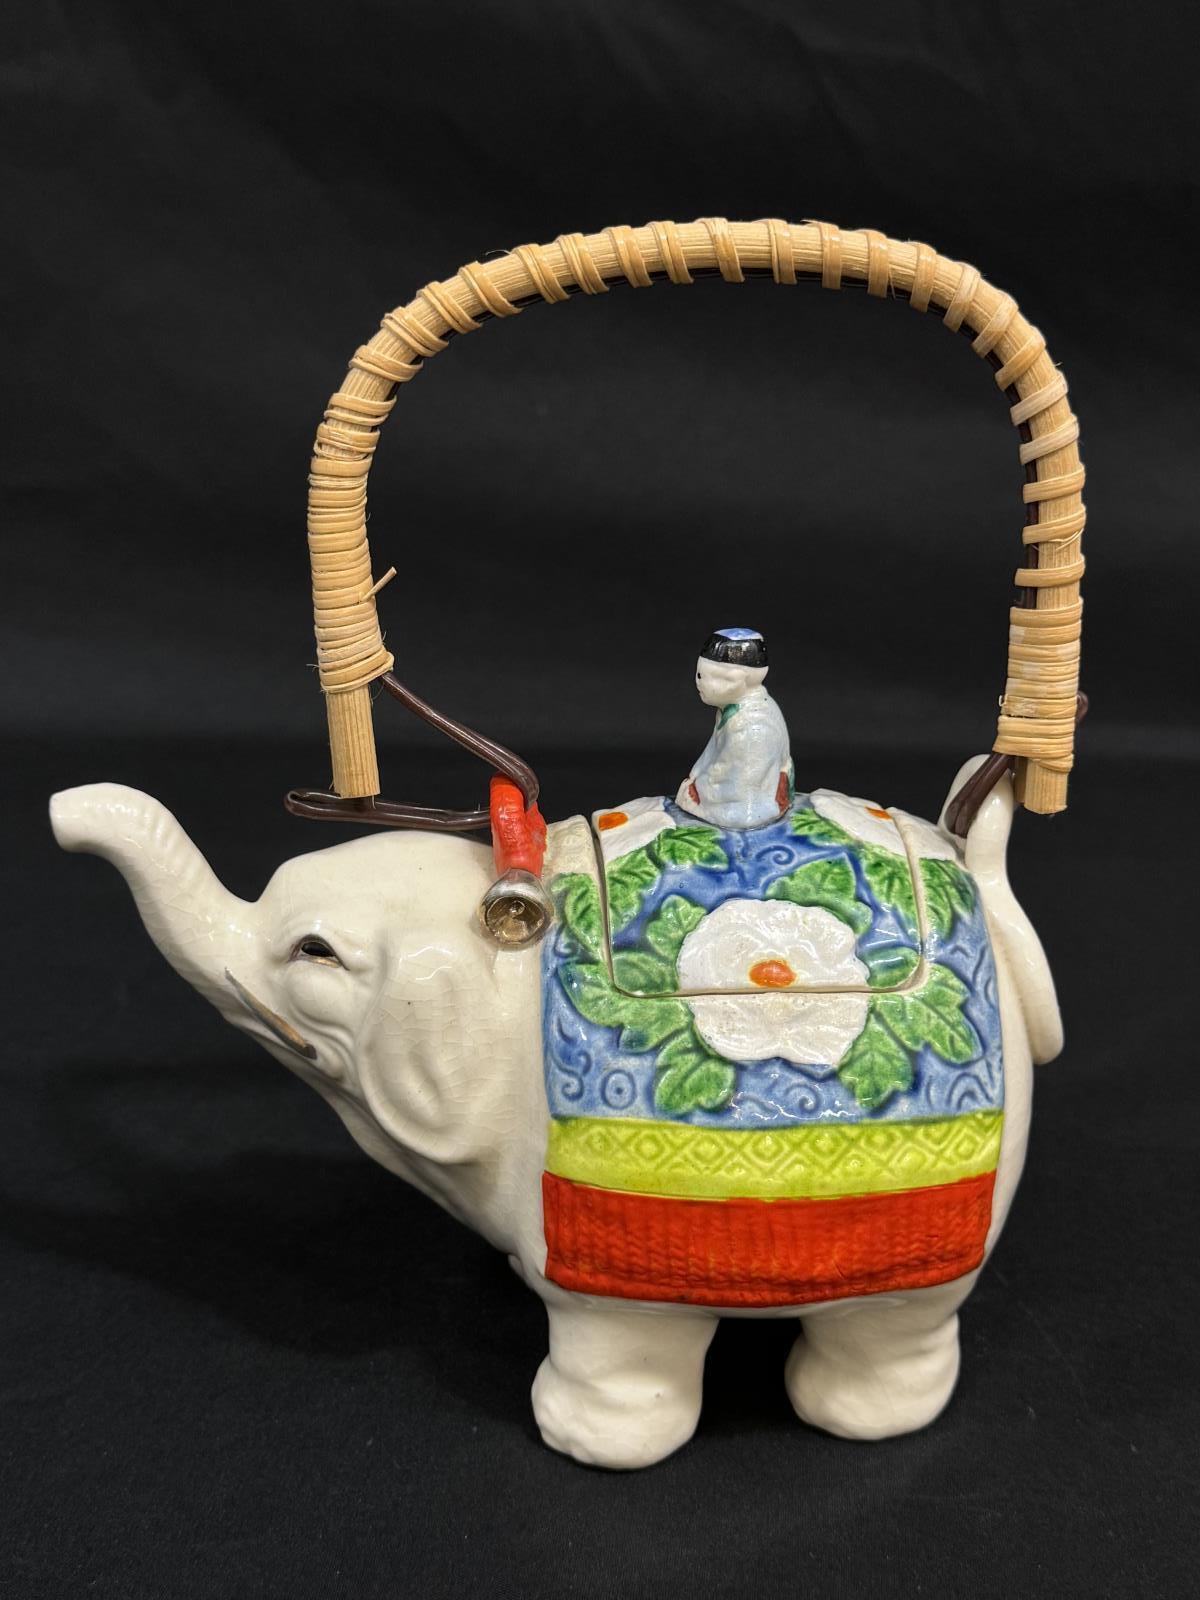 Vintage Ceramic Elephant And Rider Teapot With Bamboo Handle